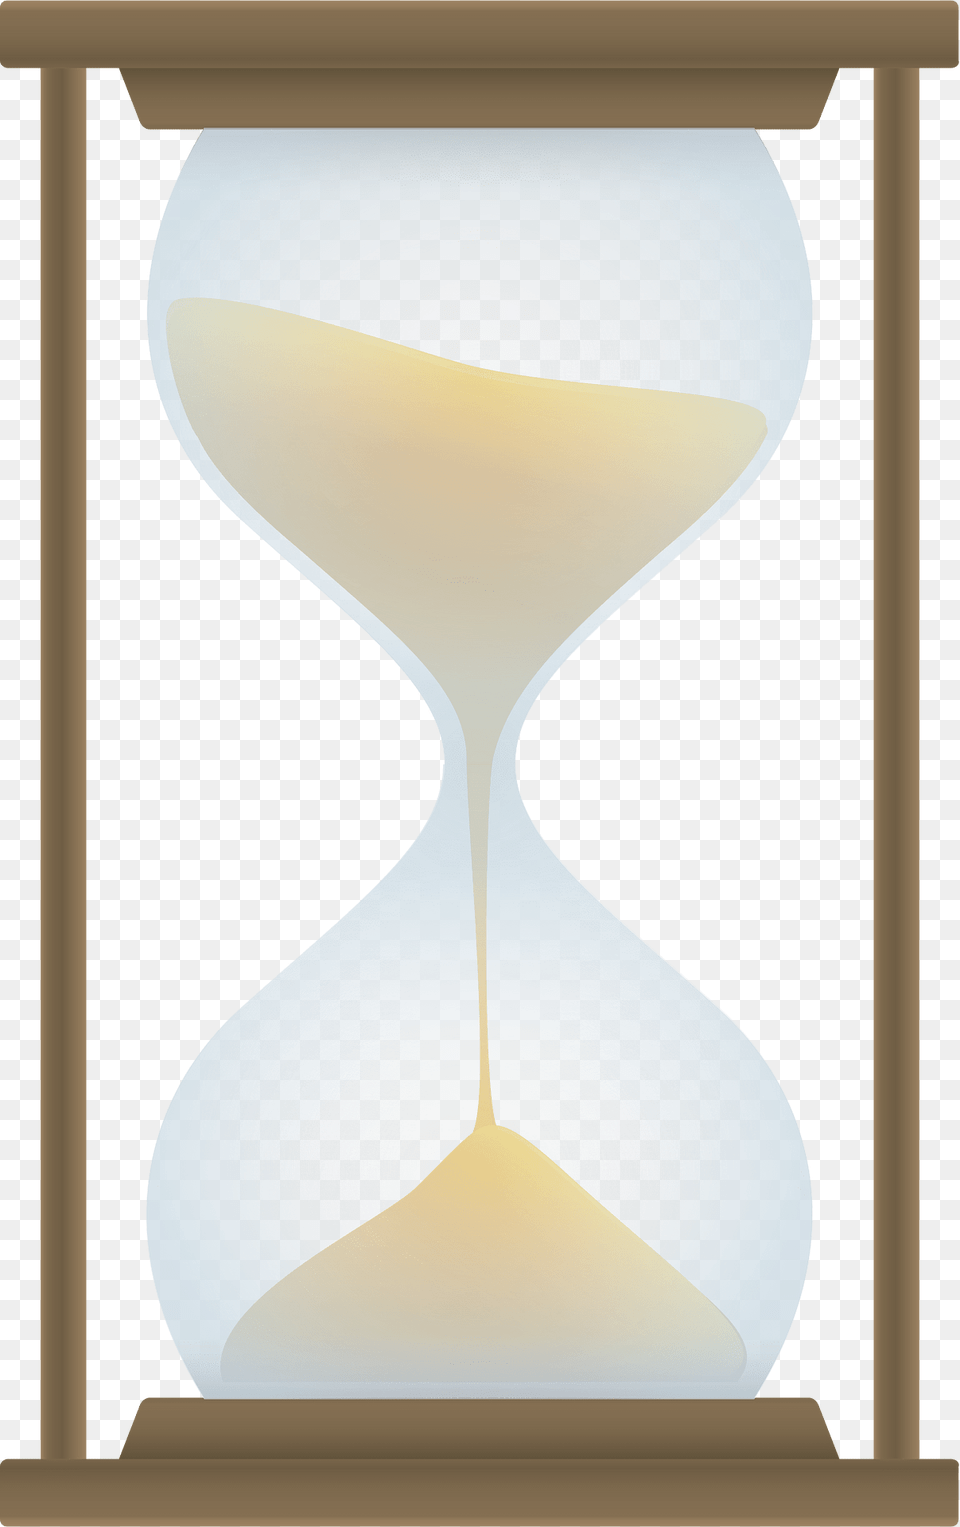 Hourglass Clipart Free Transparent Png